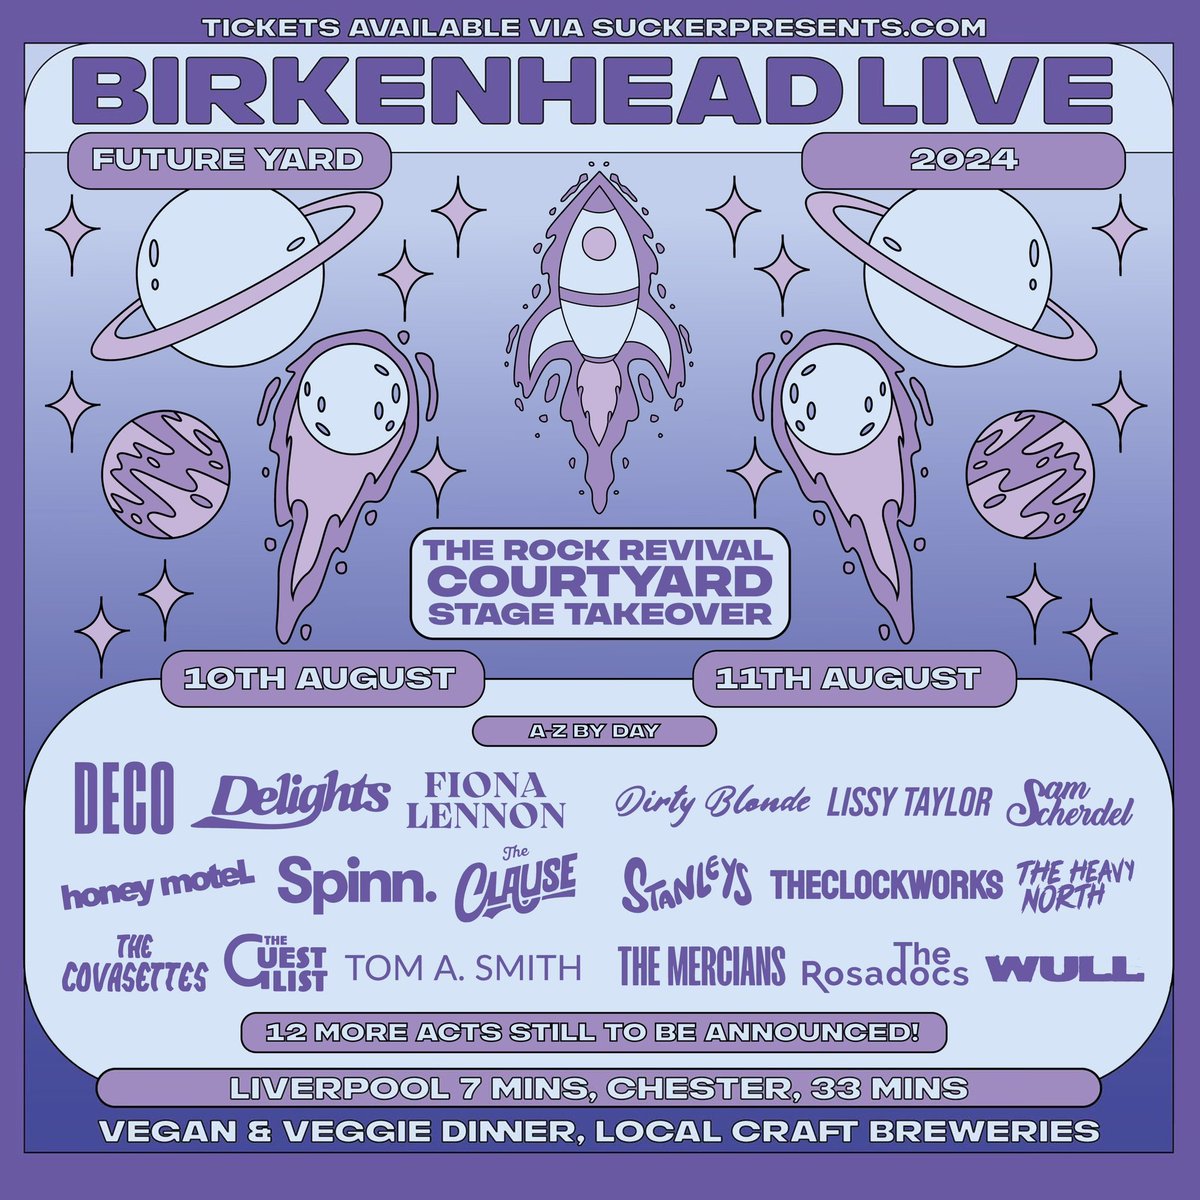 Buzzing to announce that we will have our very own stage at this years @BirkenheadLive Festival 😍 The Rock Revival Courtyard Stage will showcase some very exciting, upcoming bands & artists and we cannot wait for it 🕺🏻 Tickets on sale now 👇🏻 linktr.ee/birkenheadlive